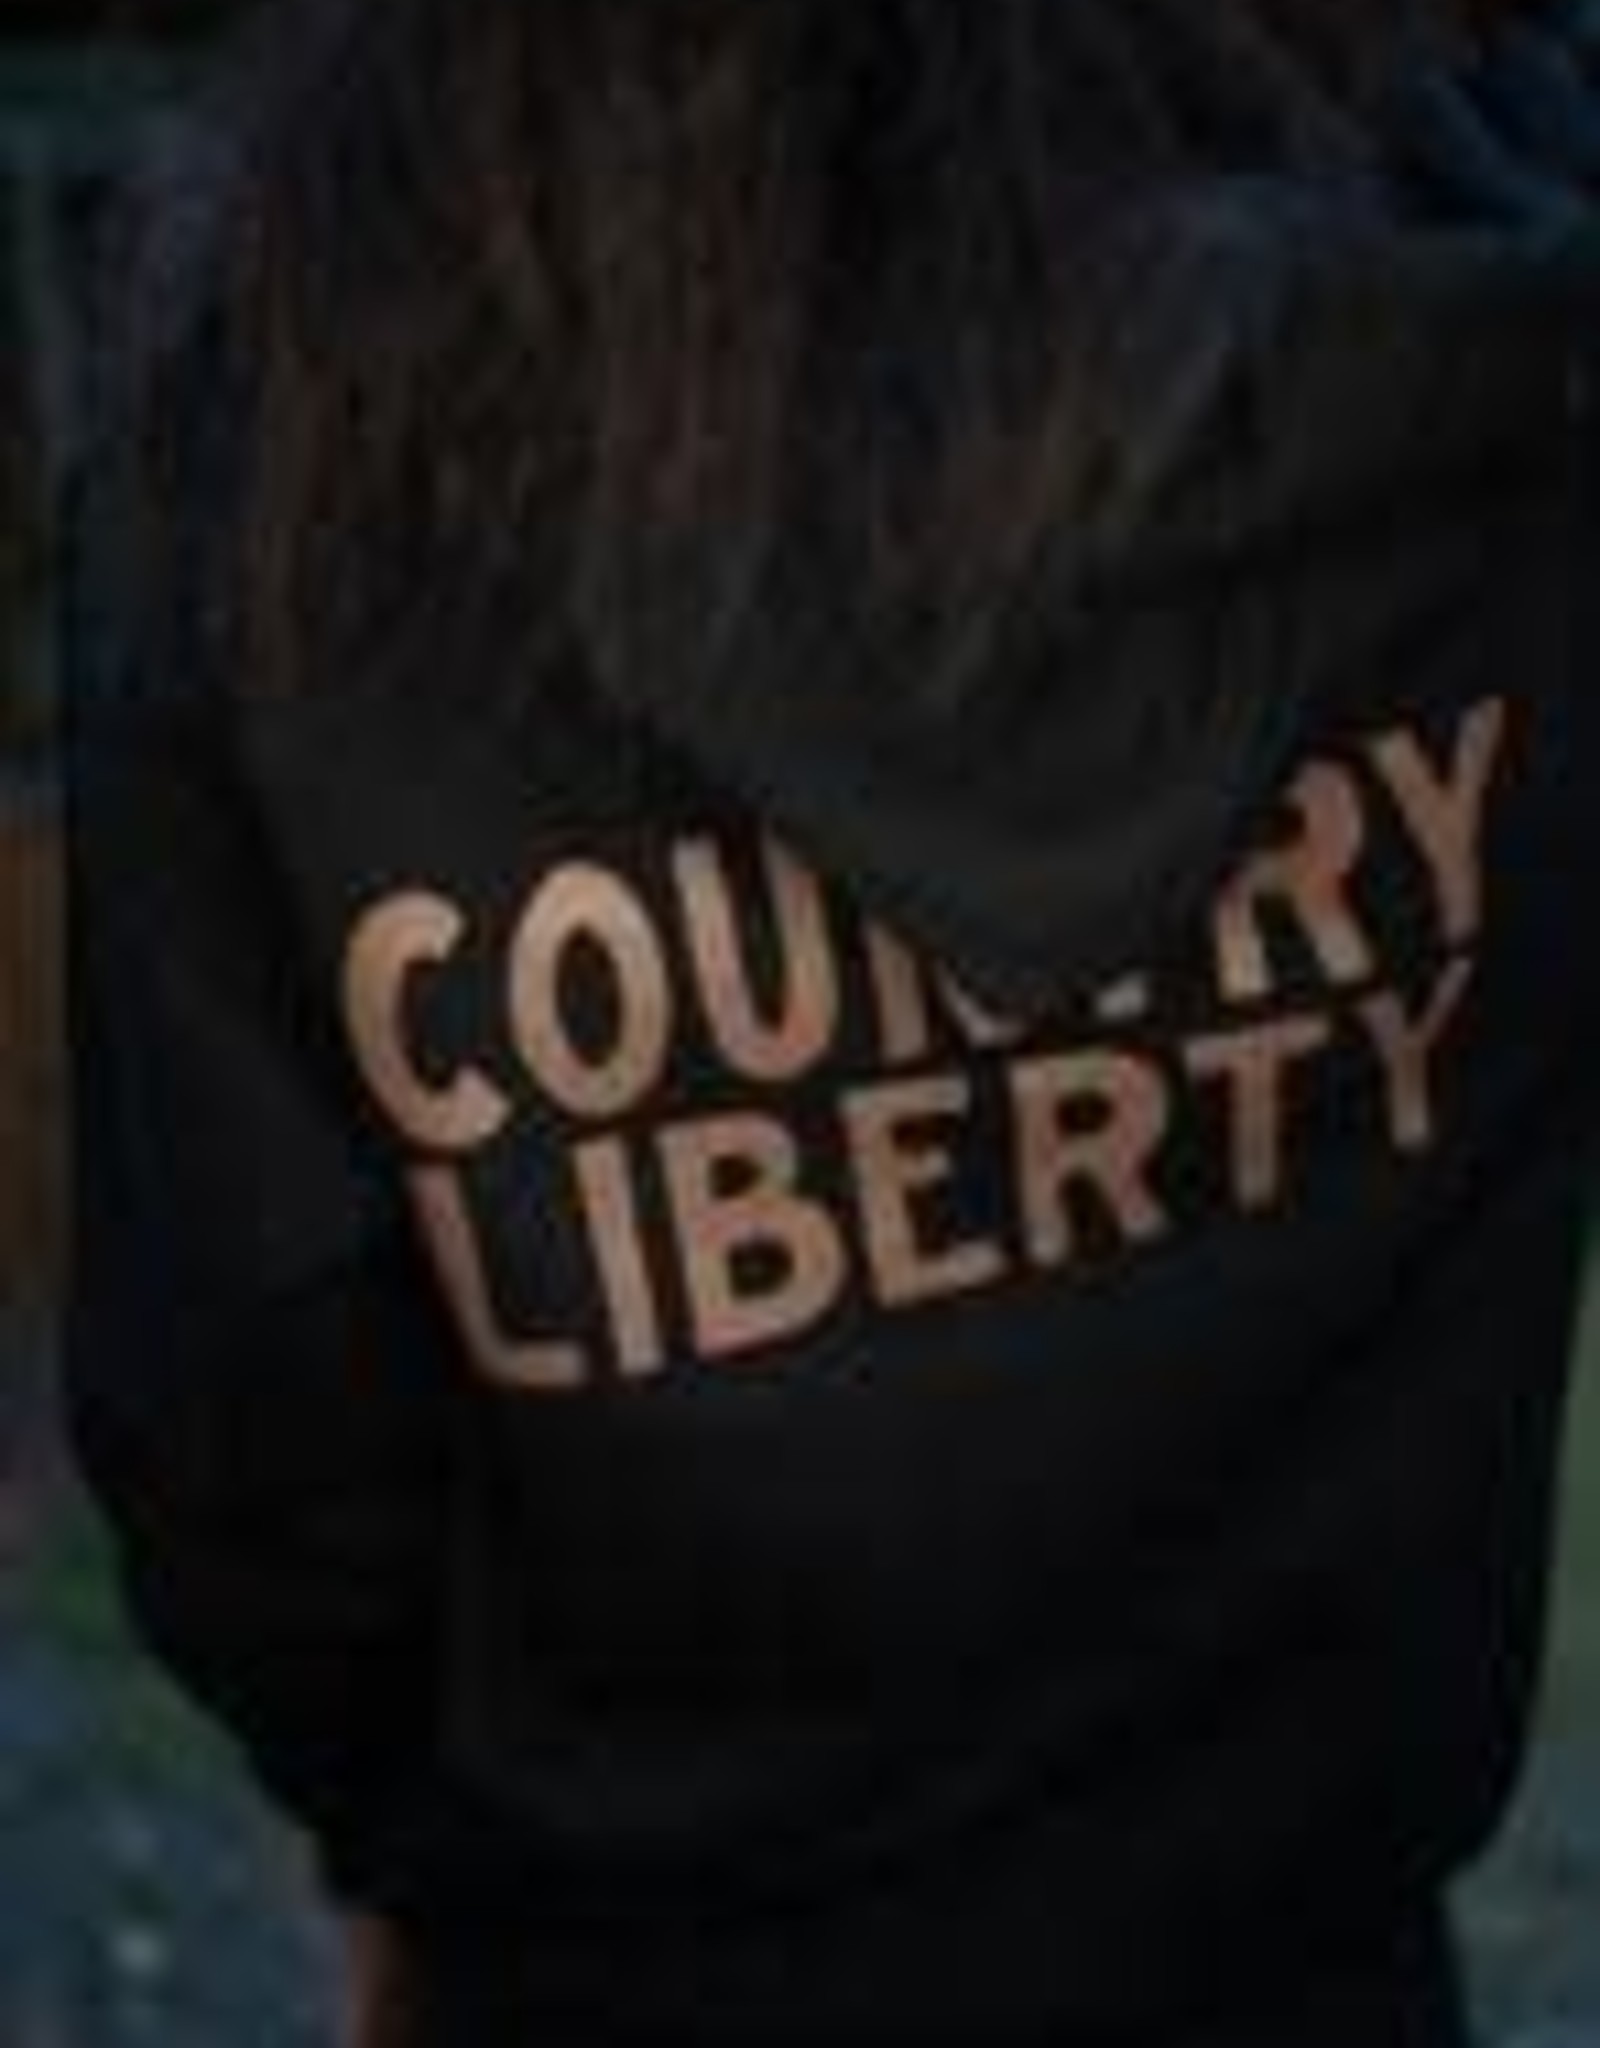 Country Liberty CL 1924 unisex hoodie